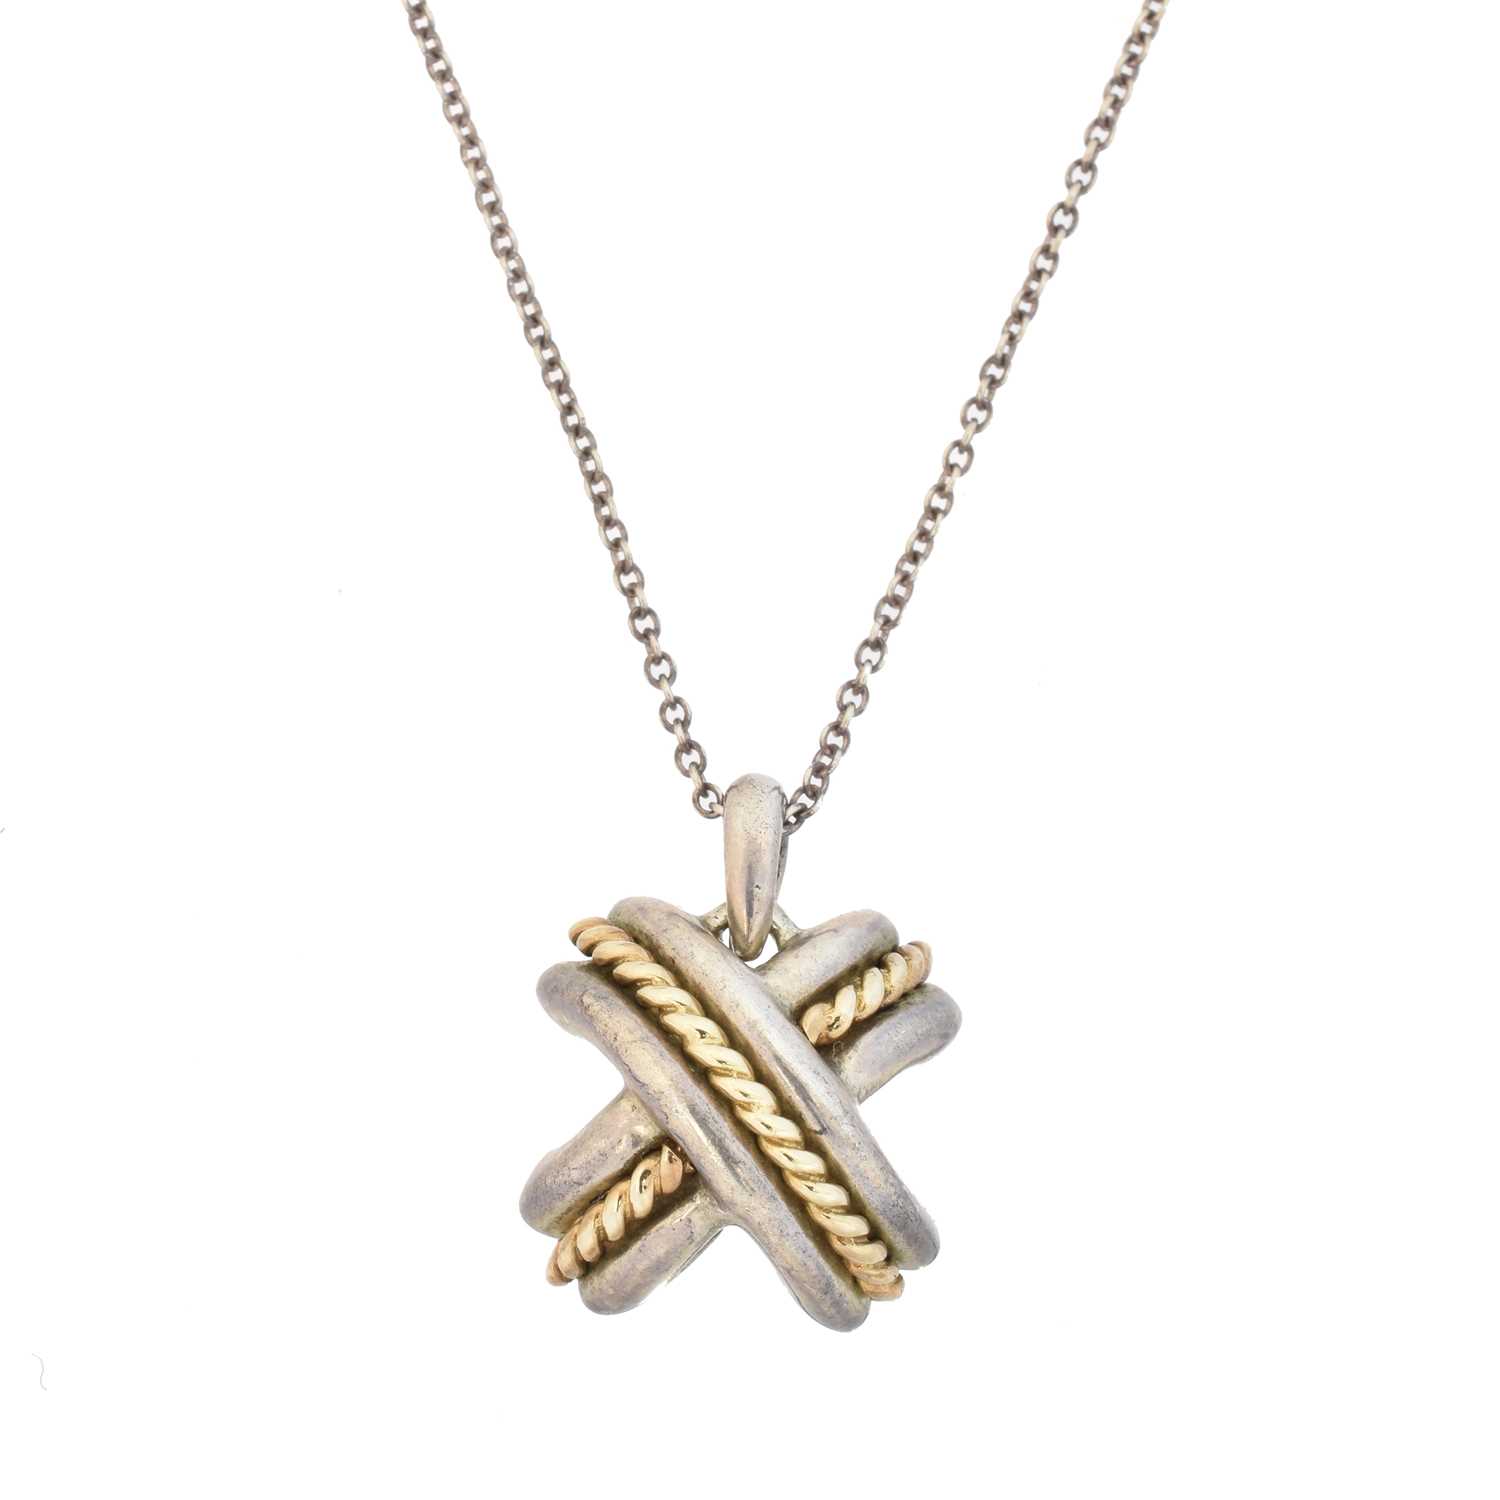 Lot 48 - A Tiffany & Co. silver and gold cross pendant